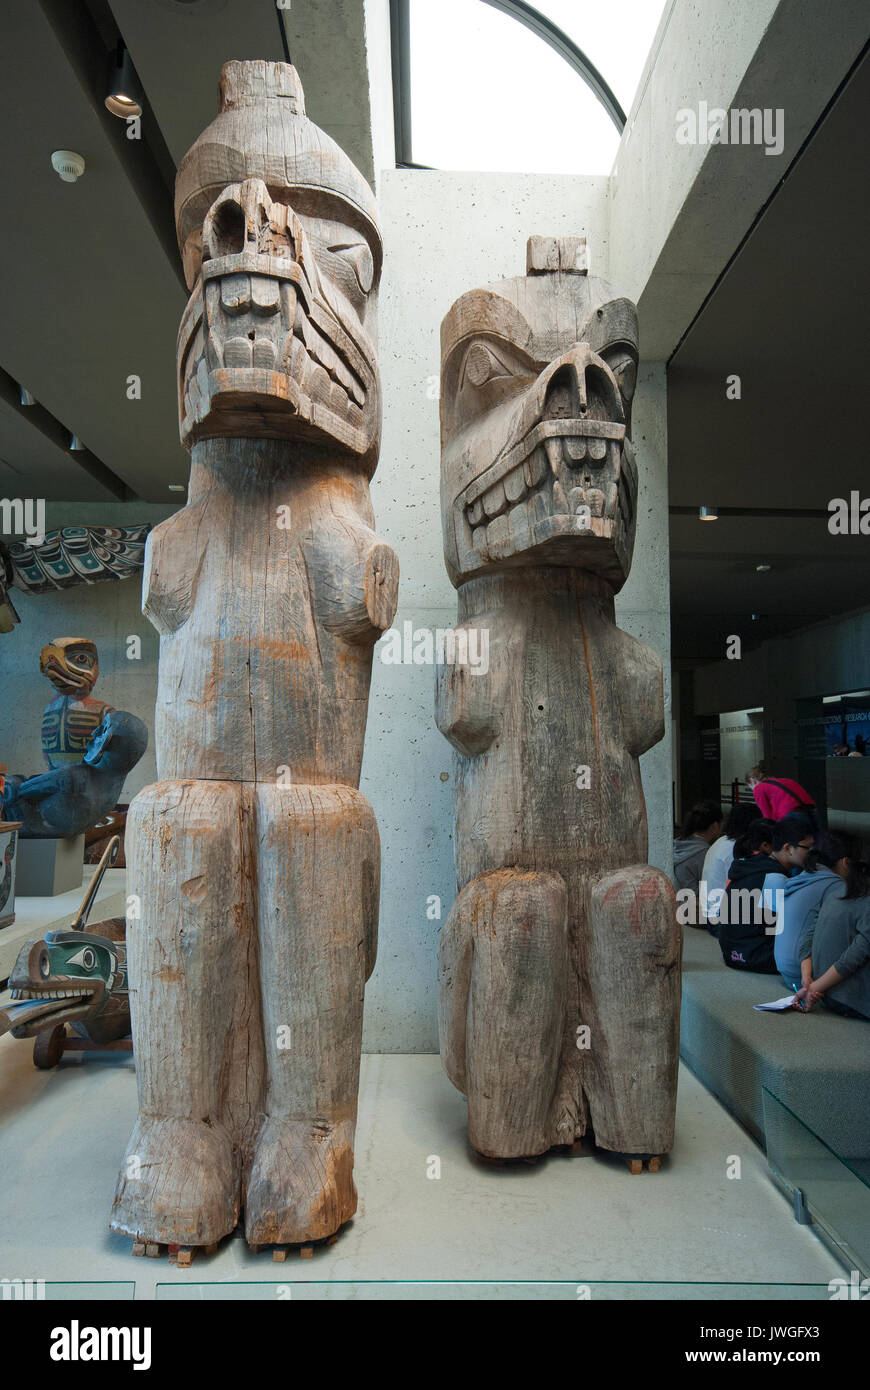 Grizzly bear sculptures carved by Kwakwaka'wakw artist Awalaskanis, Museum of Anthropology, Vancouver, British Columbia, Canada Stock Photo